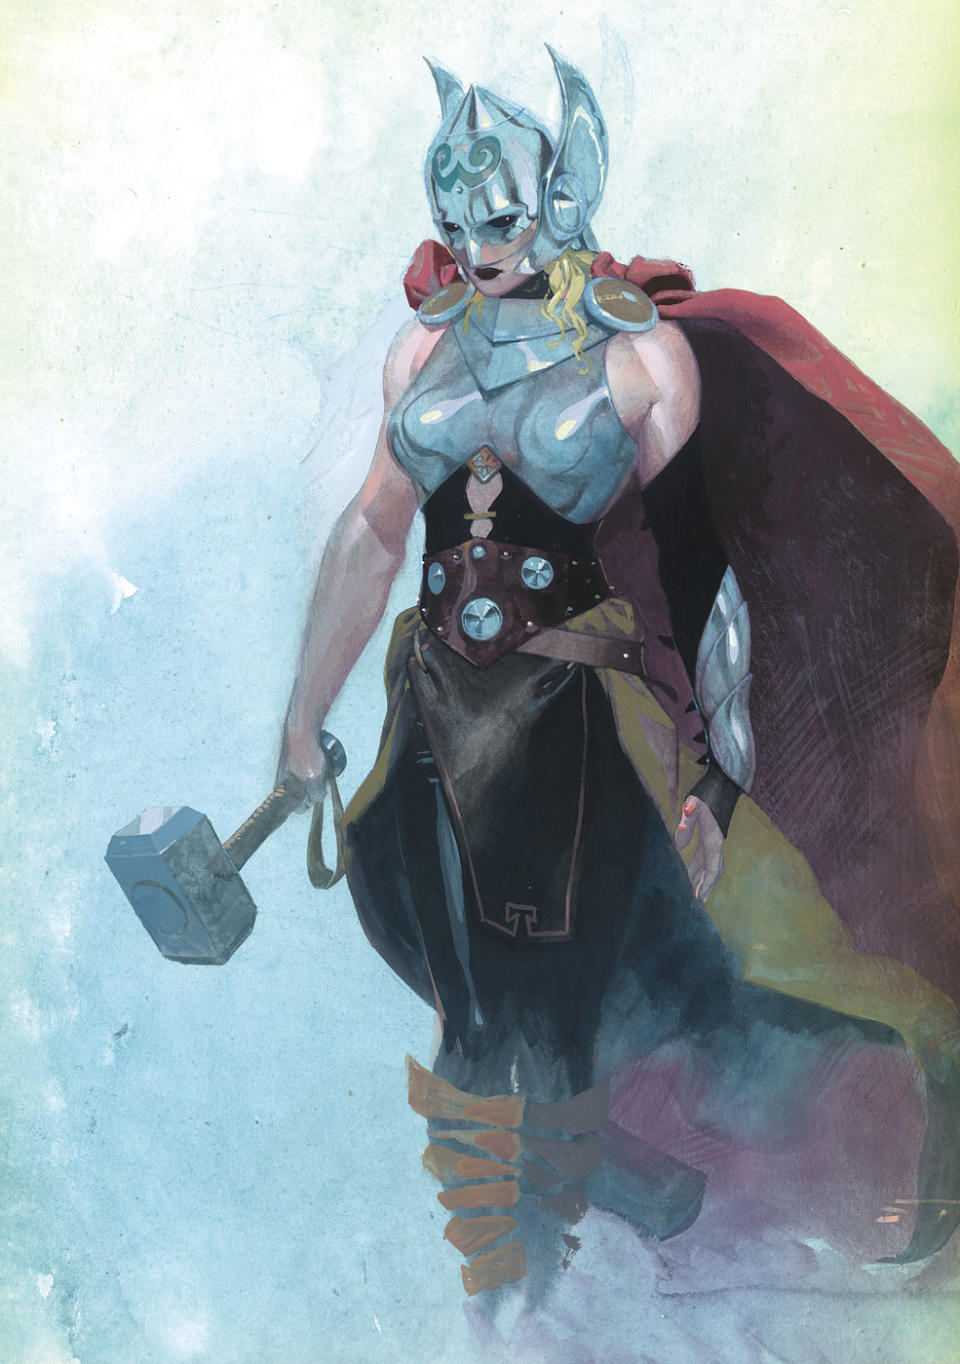 On October 1, for the first time ever, a woman shall be deemed worthy to wield the hammer Mjolnir and possess the powers of Thor.<span class="copyright">Marvel Comics</span>